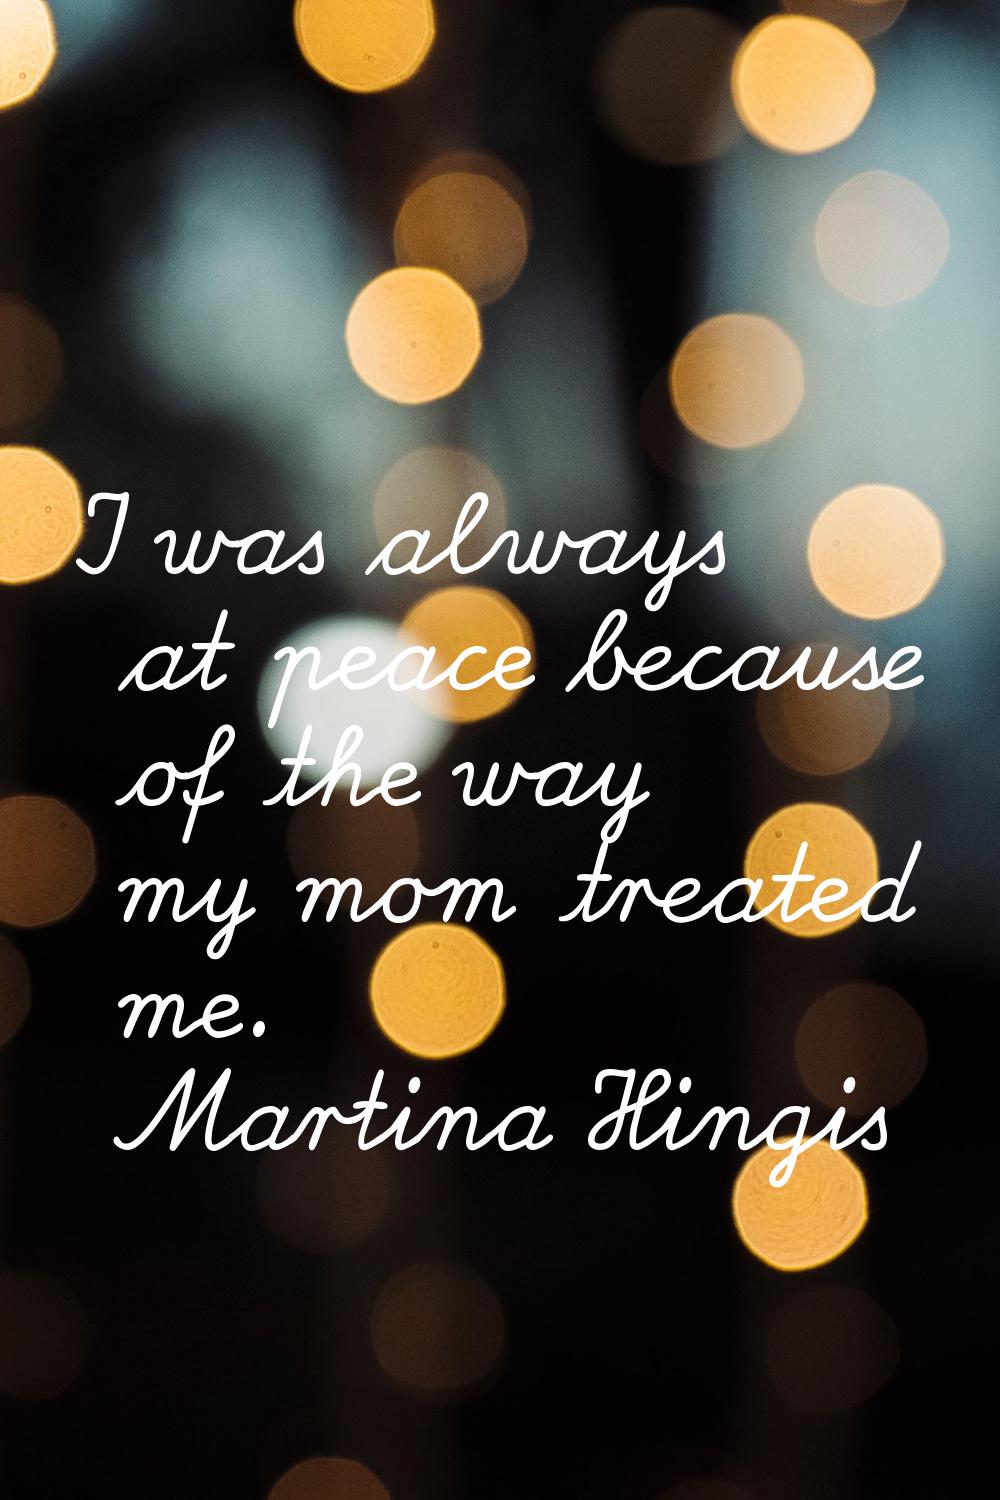 I was always at peace because of the way my mom treated me.